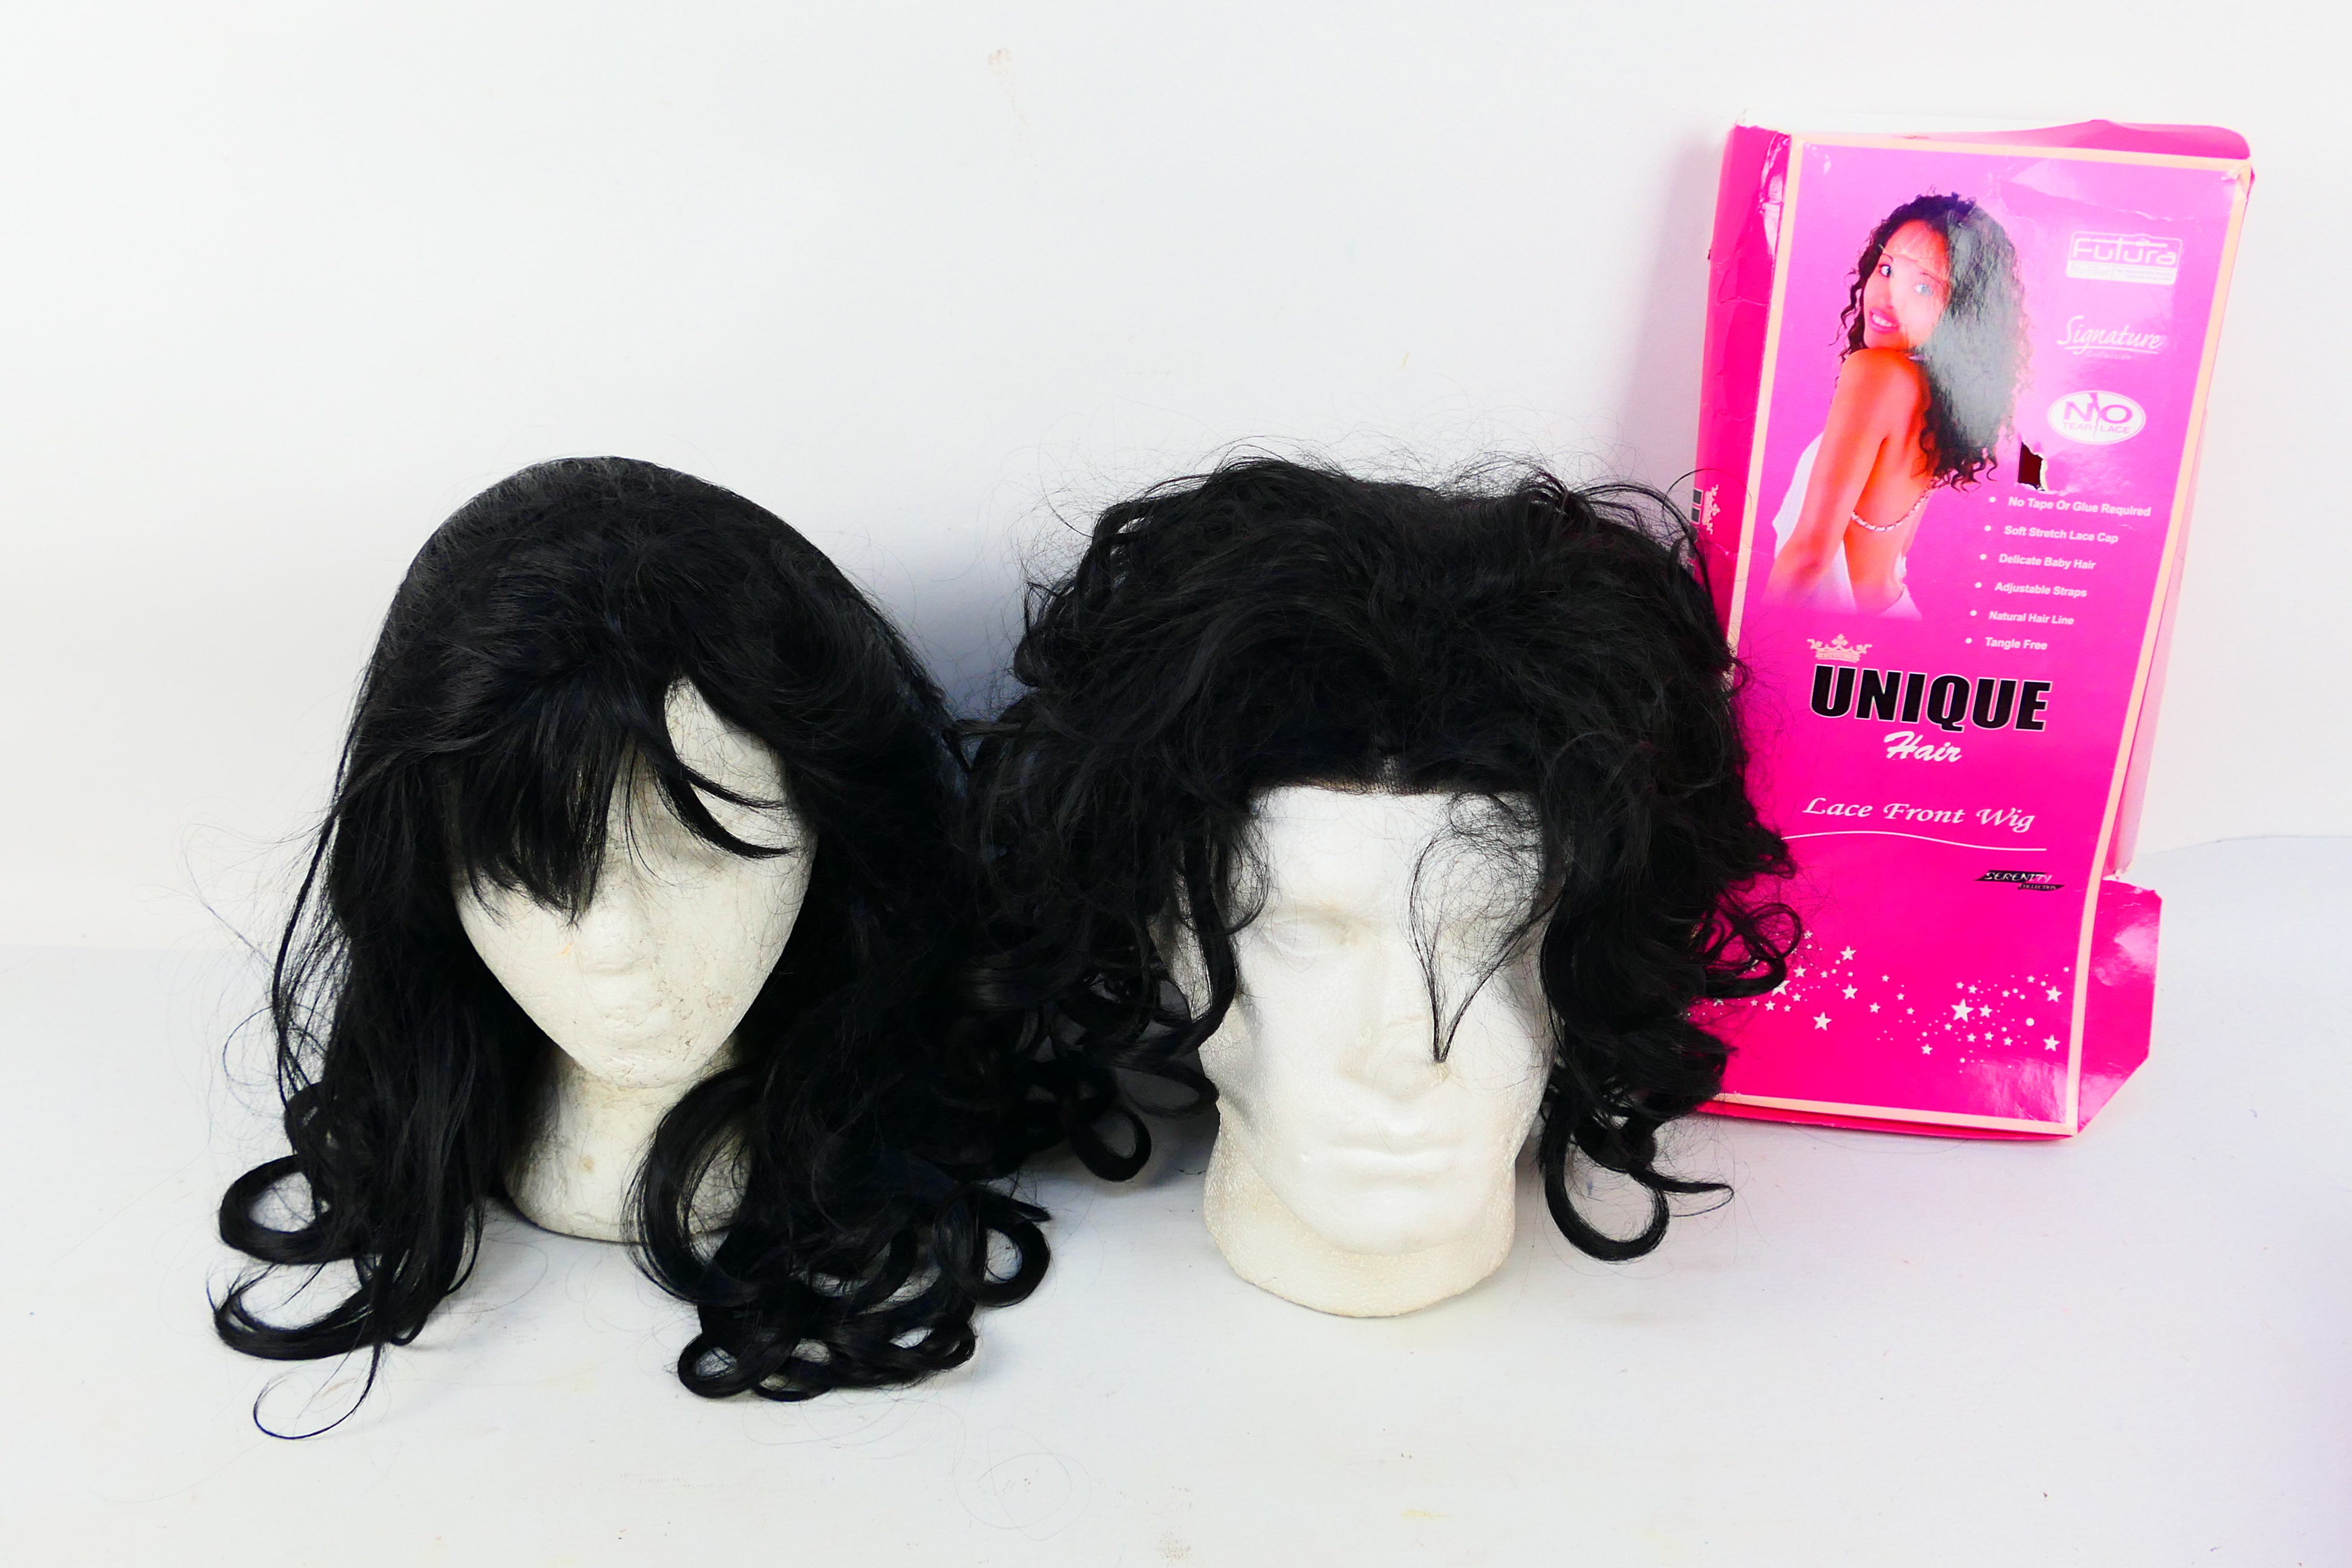 Wigs - A selection of Costume / Theatre wigs appearing in Good to Excellent condition. - Image 5 of 12